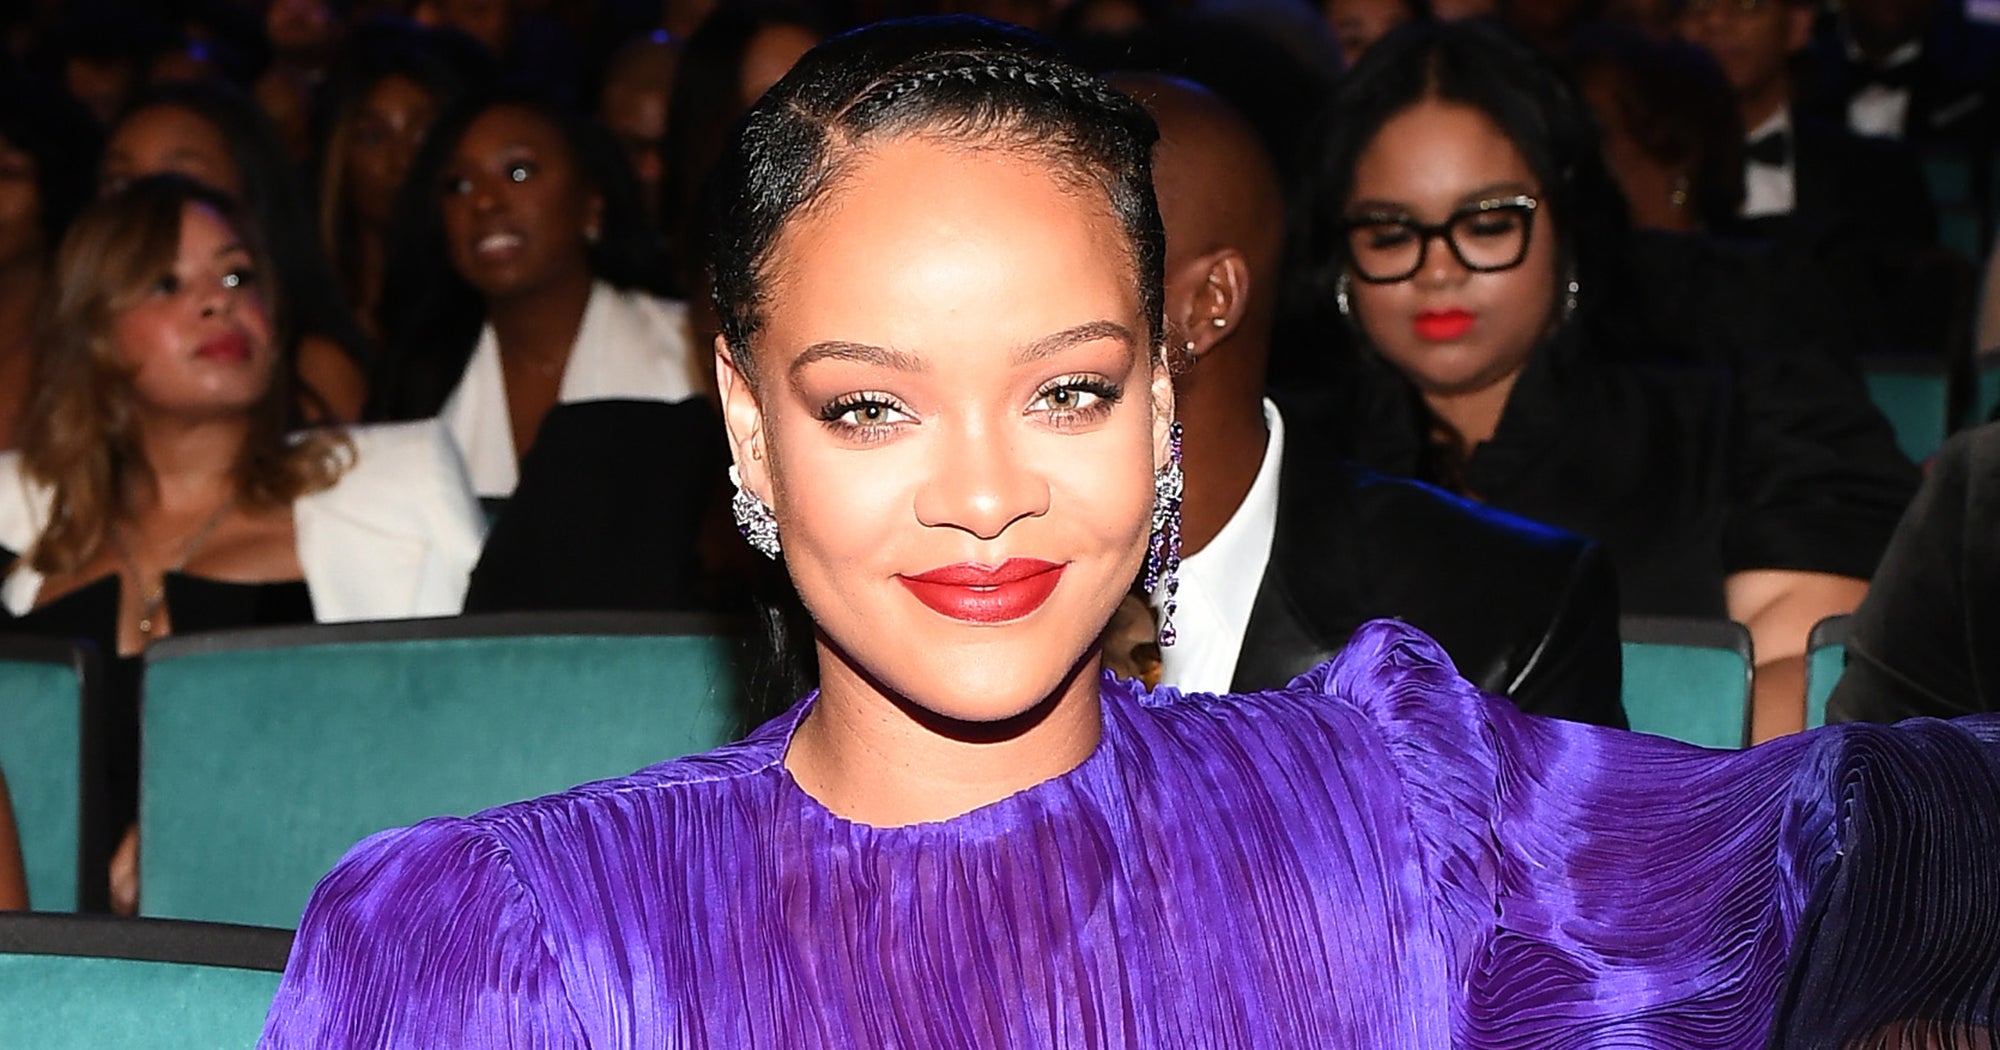 LVMH announces this Wednesday that it has decided, in agreement with Rihanna,  to suspend the activities of the Fenty brand pending an improvement in the  situation. Rihanna and LVMH have jointly taken